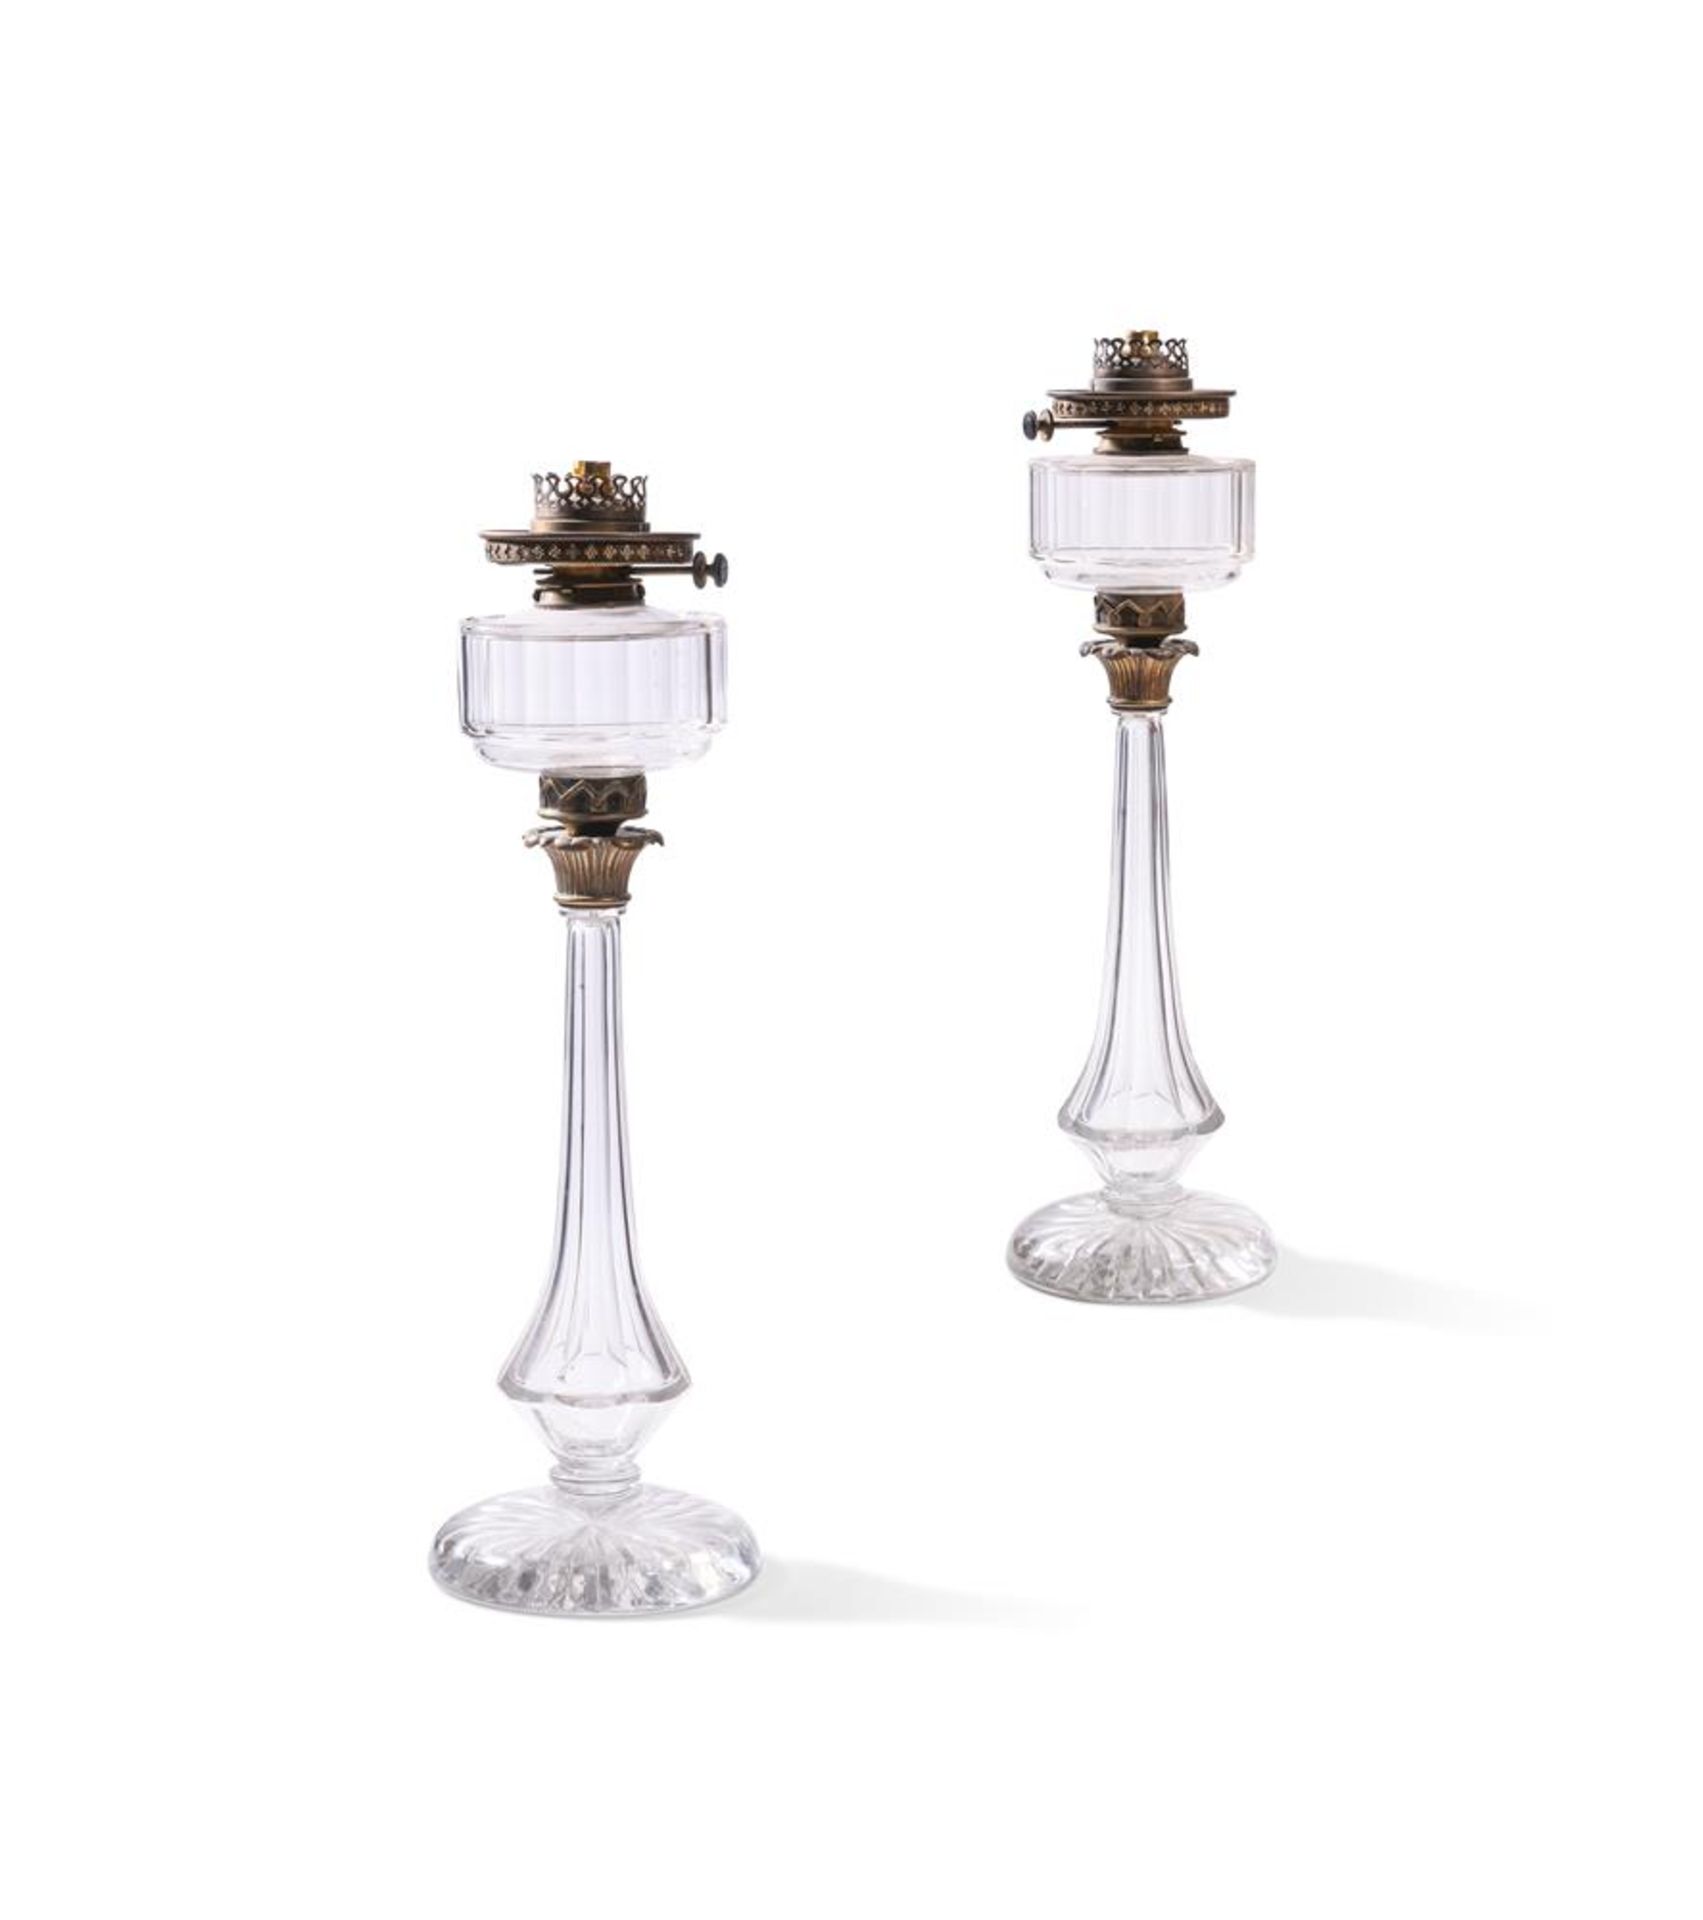 A PAIR OF VICTORIAN MOULDED GLASS AND GILT METAL OIL LAMPS, SECOND HALF 19TH CENTURY